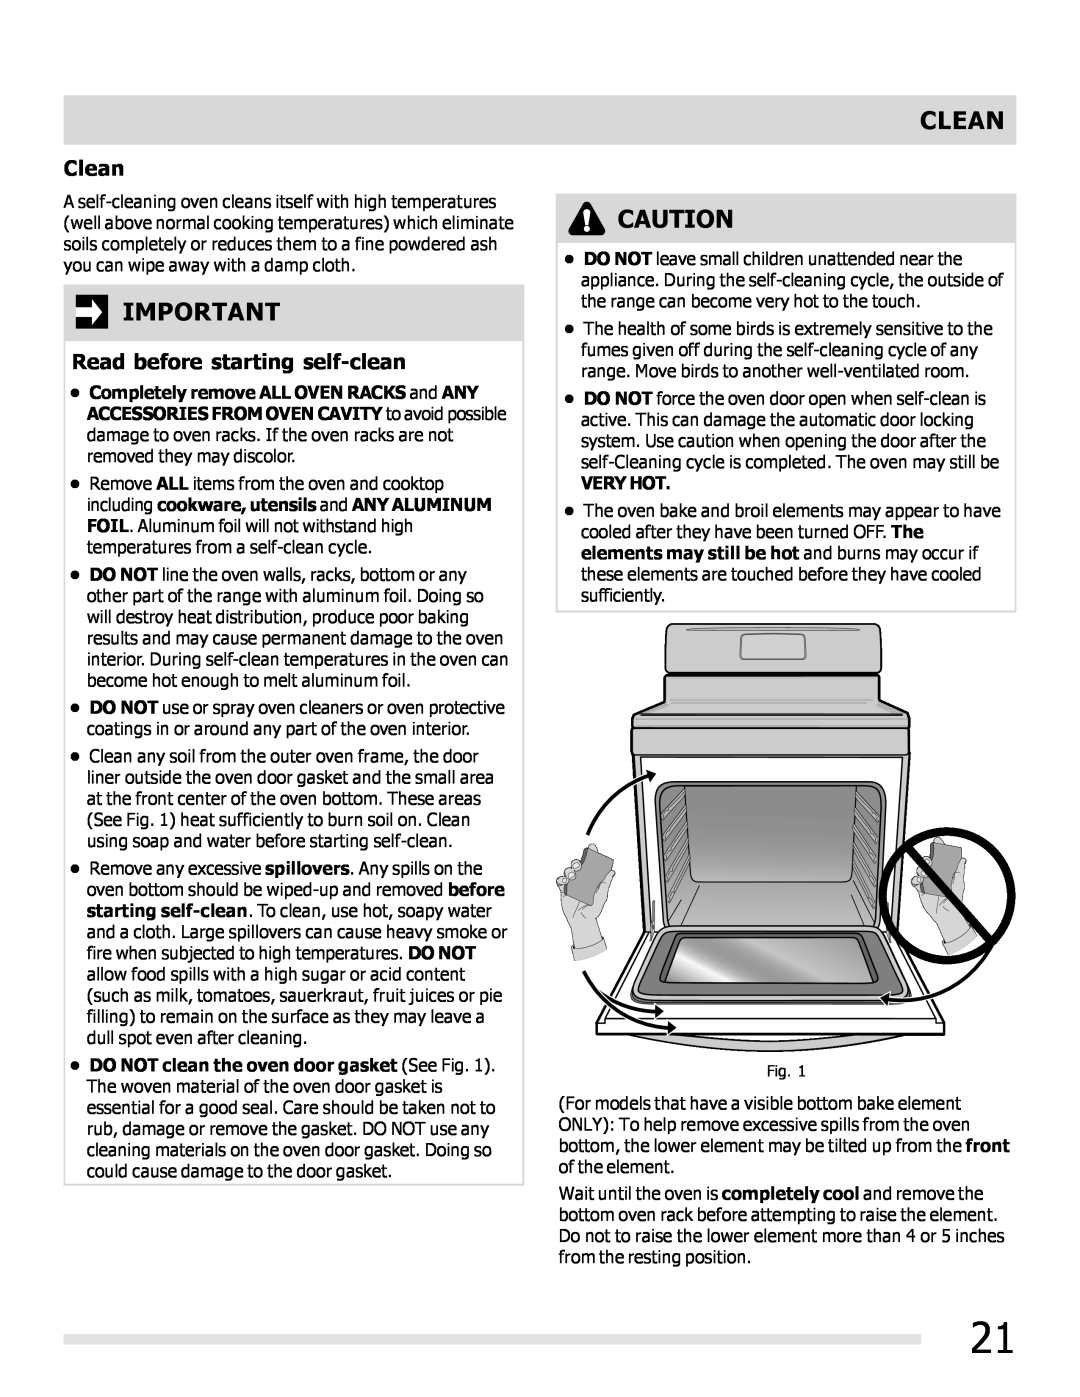 Frigidaire FFEF3019MB, FFEF3019MS, FFEF3019MW important safety instructions Clean, Read before starting self-clean 